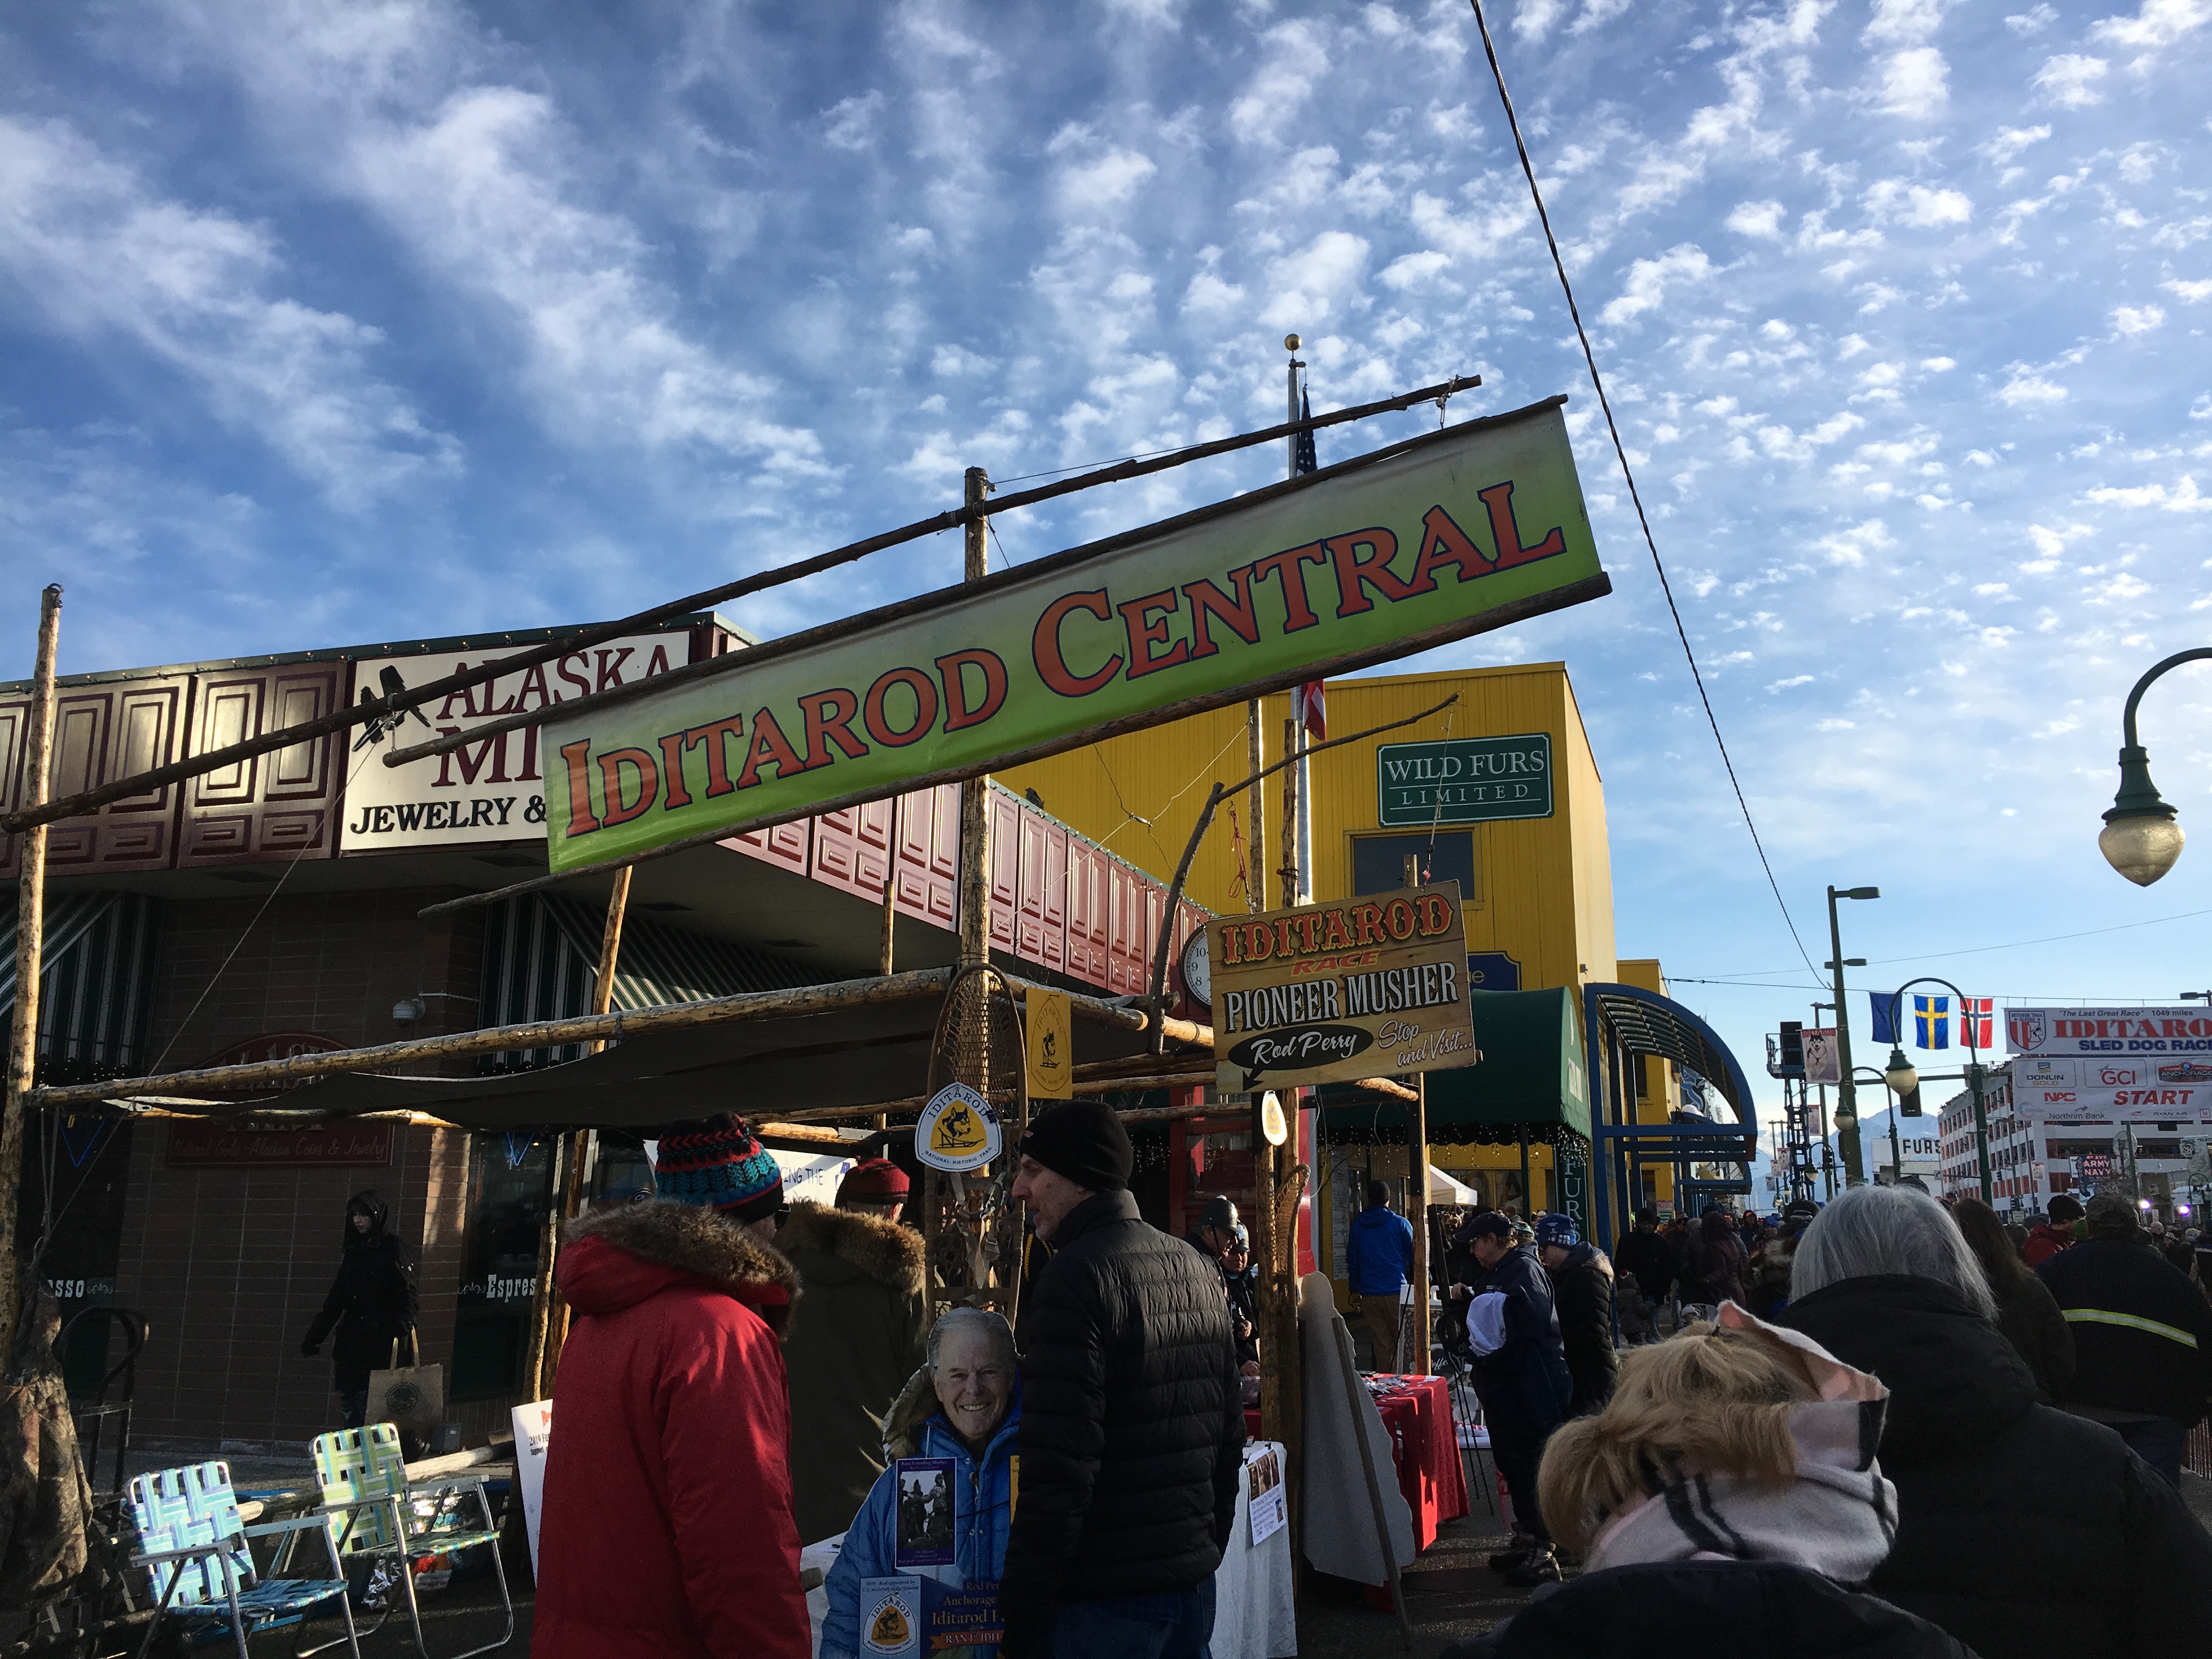 A sign at the 2019 Iditarod that reads "Iditarod Central"